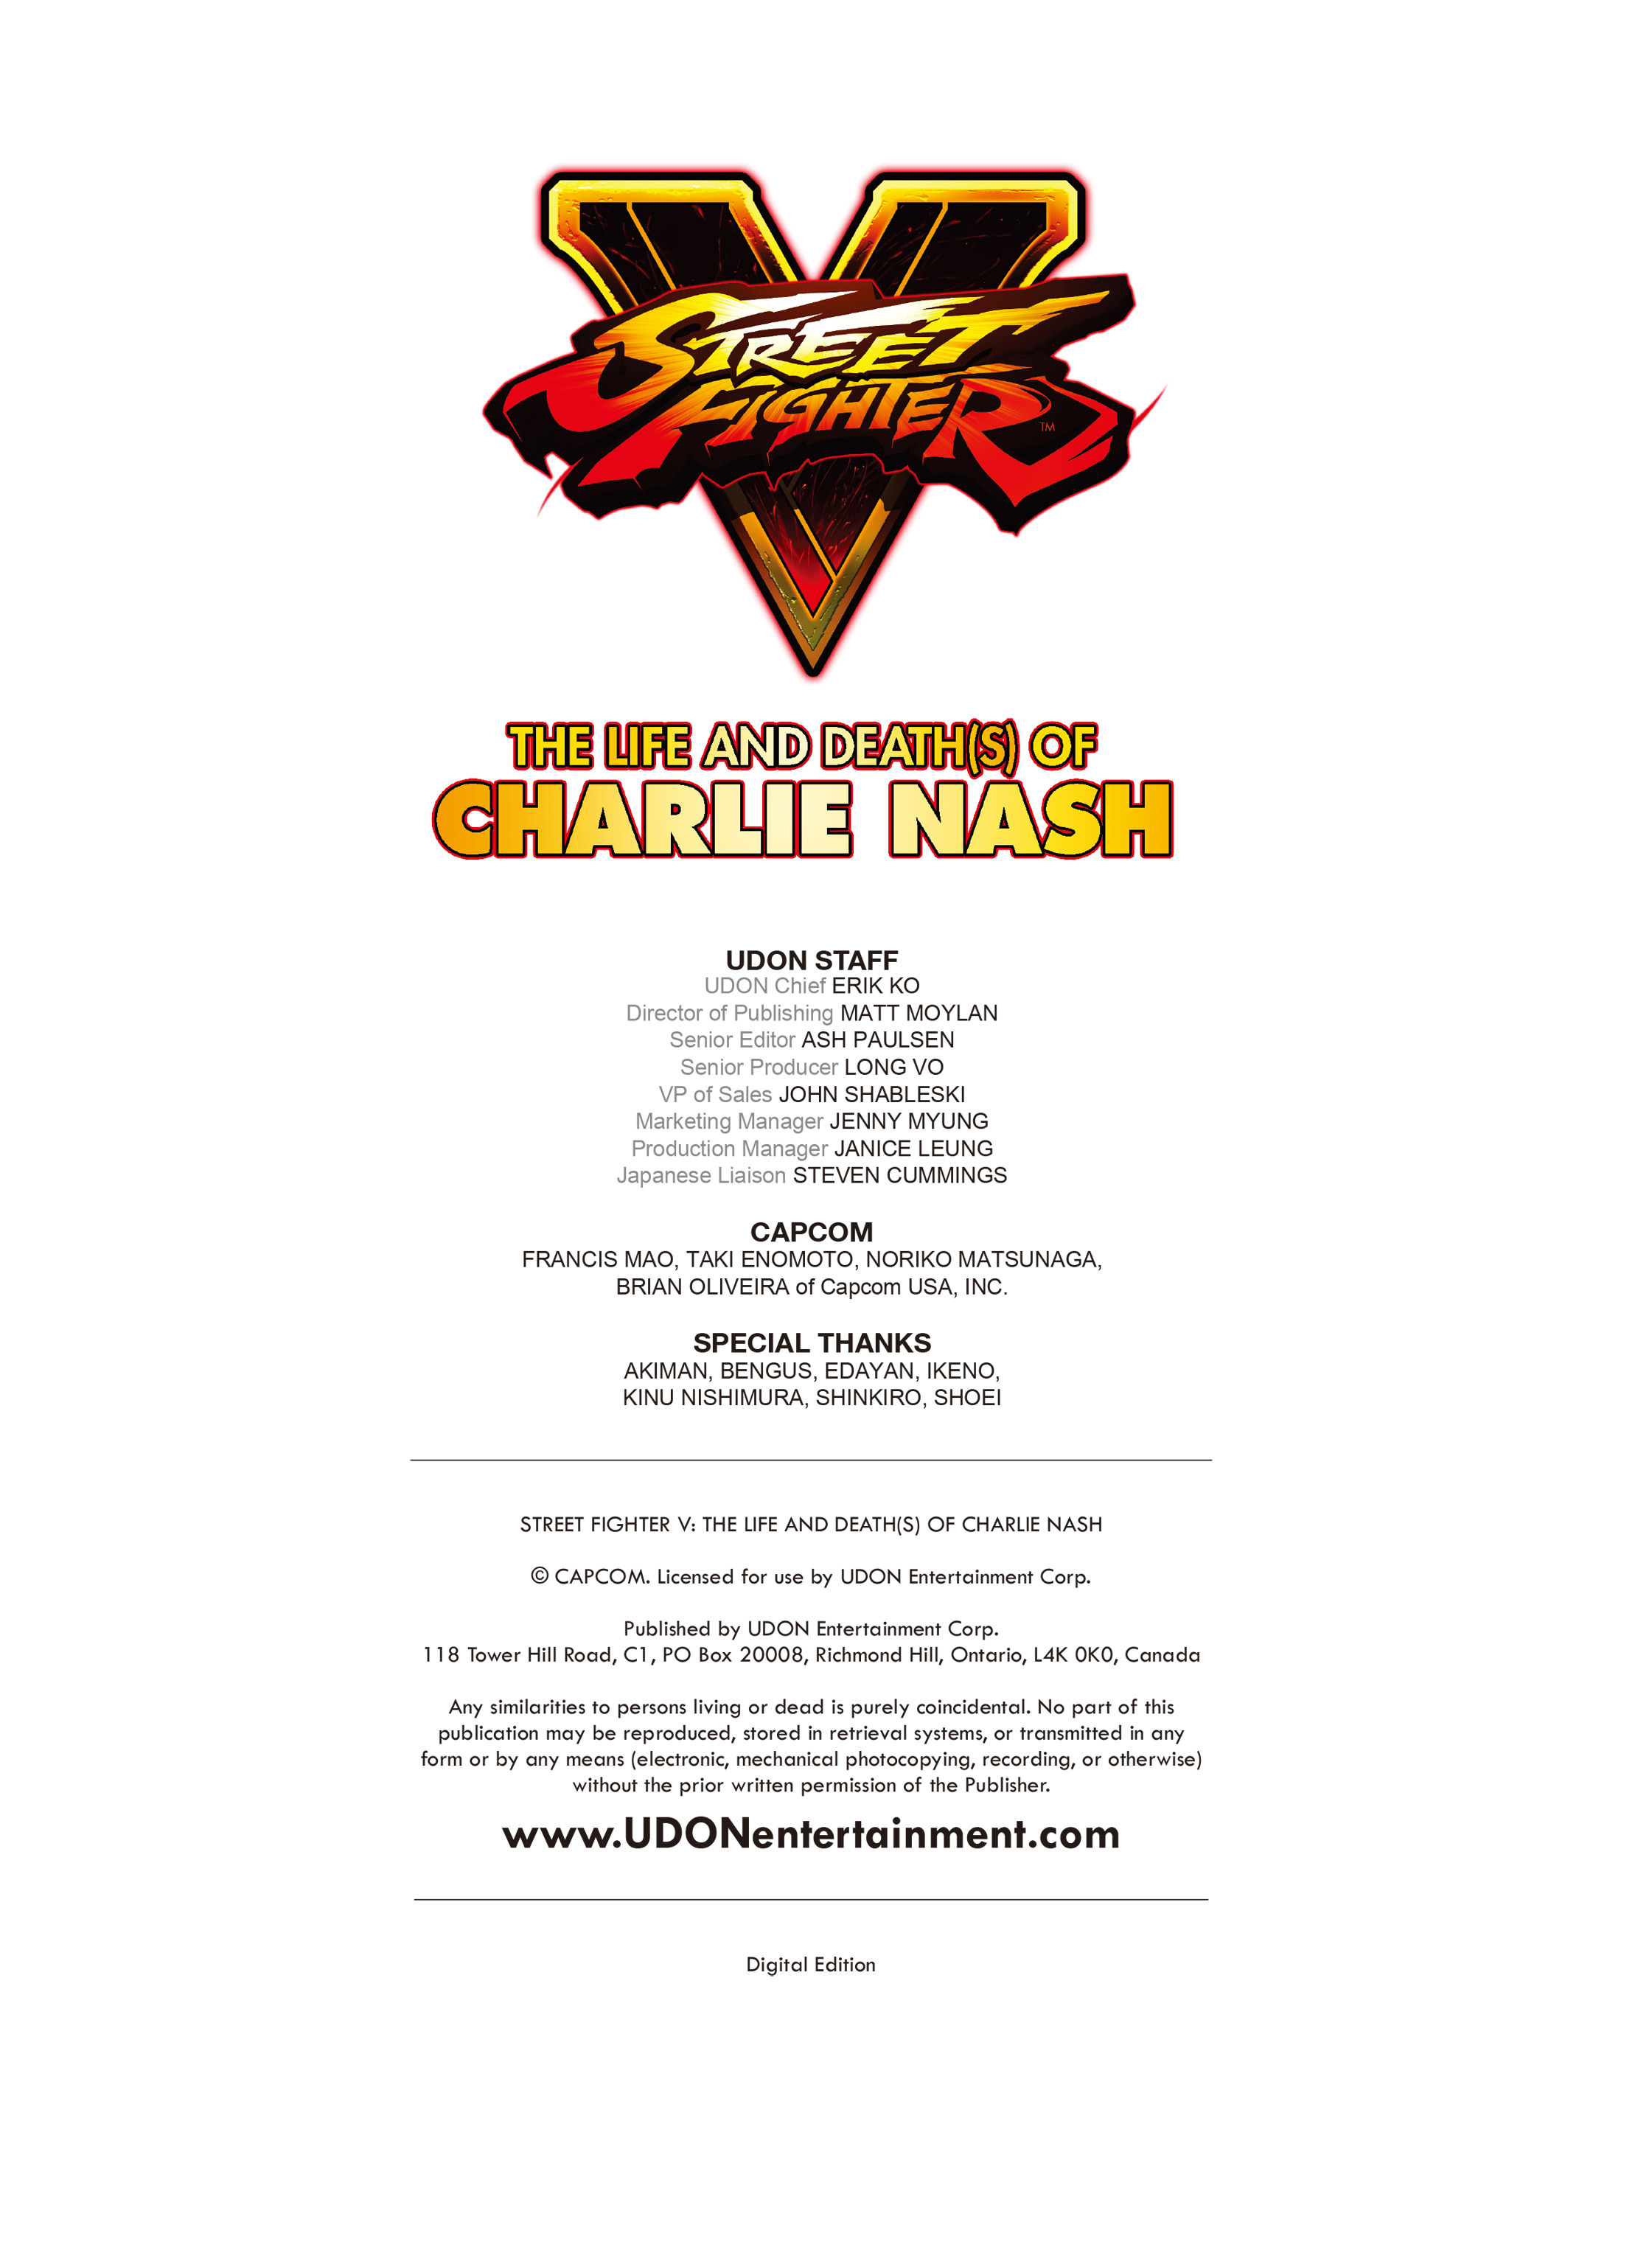 Read online Street Fighter V: The Life and Death(s) of Charlie Nash comic -  Issue # TPB - 44